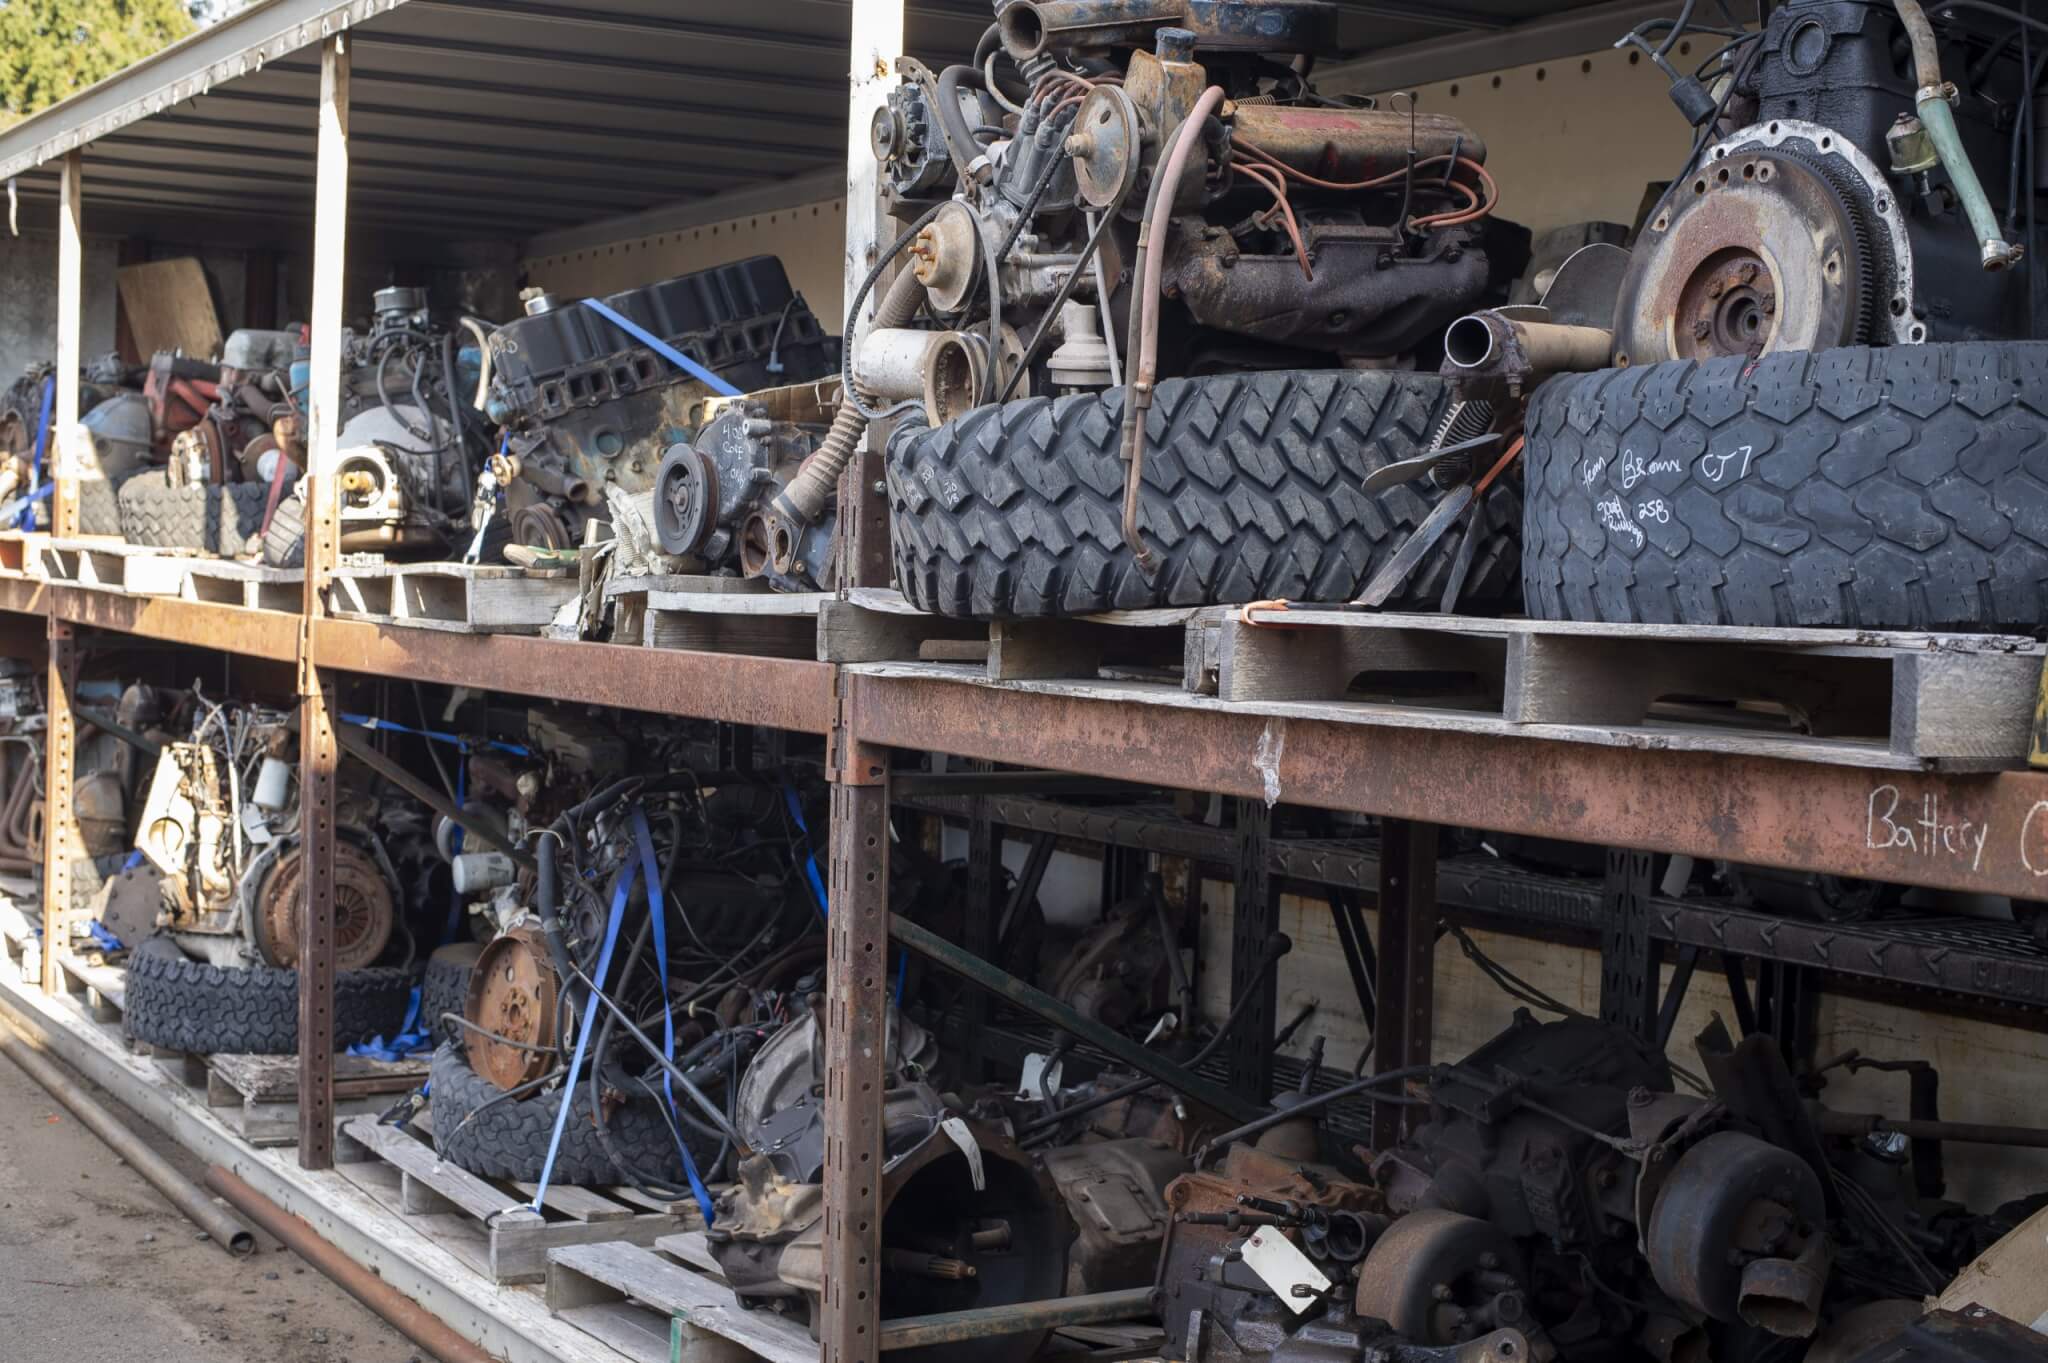 Engines lined up for sale in a salvage yard